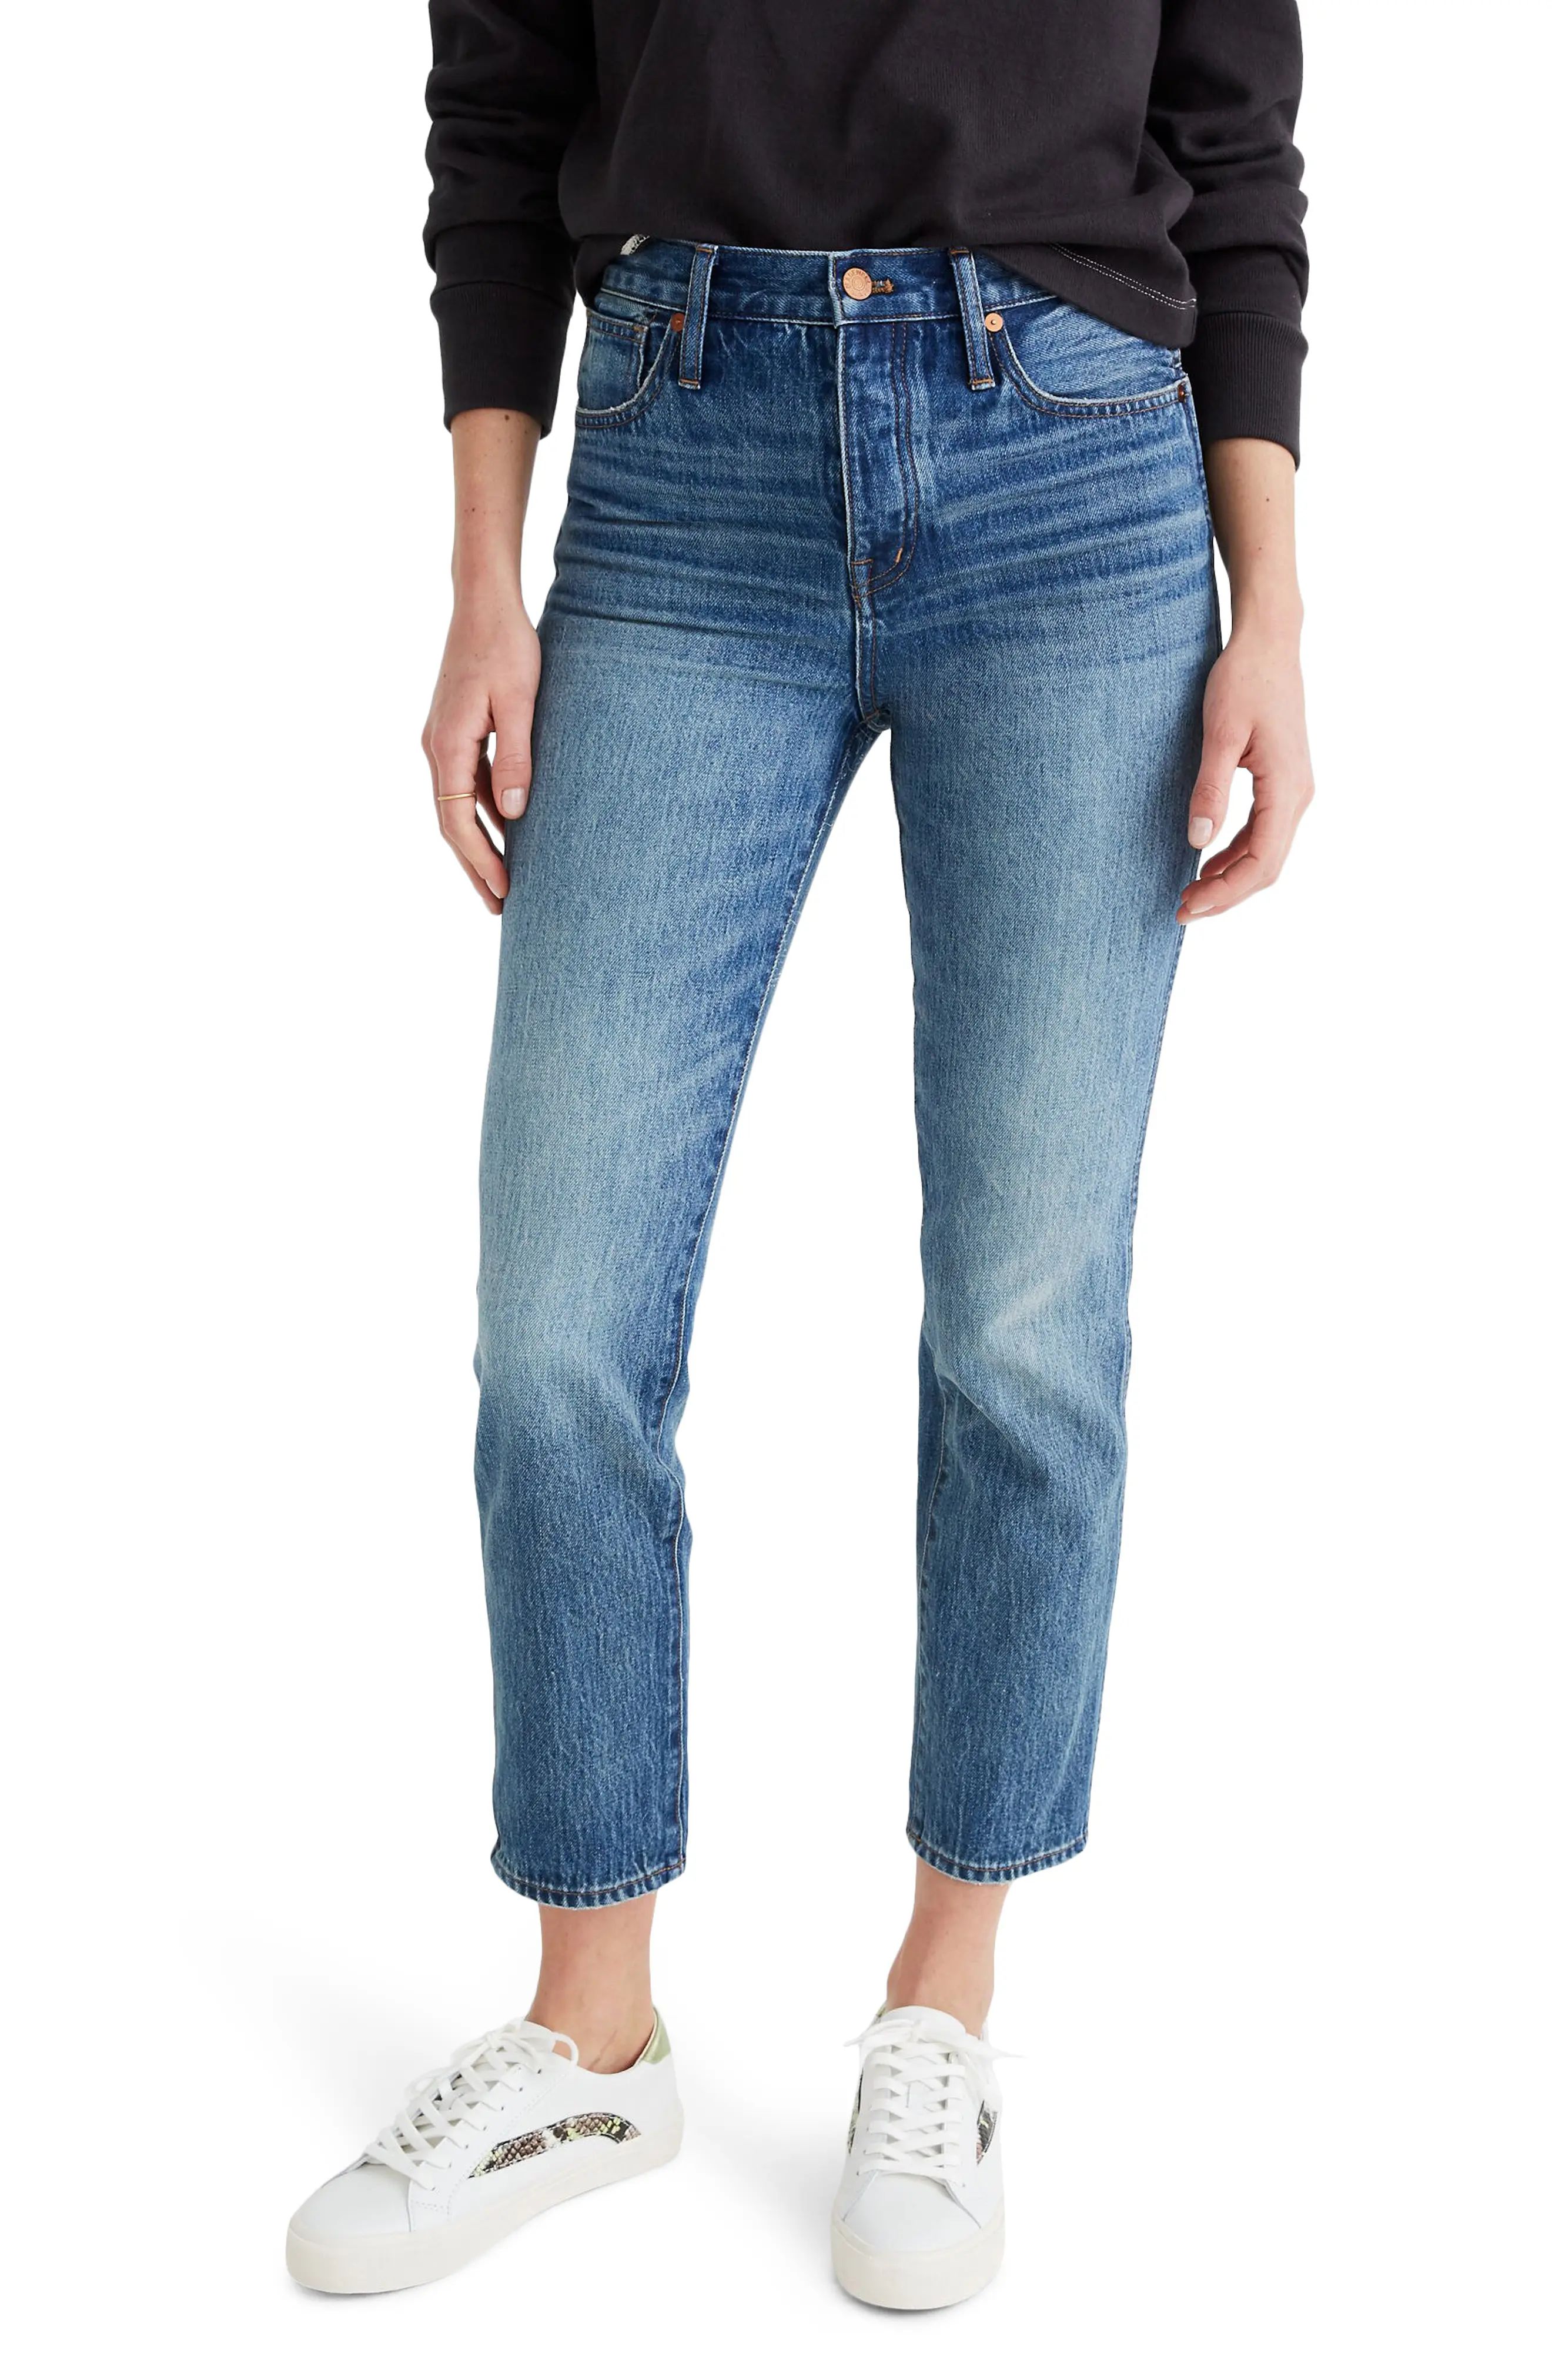 Madewell Rigid Stovepipe Jeans at Nordstrom Rack | Nordstrom Rack